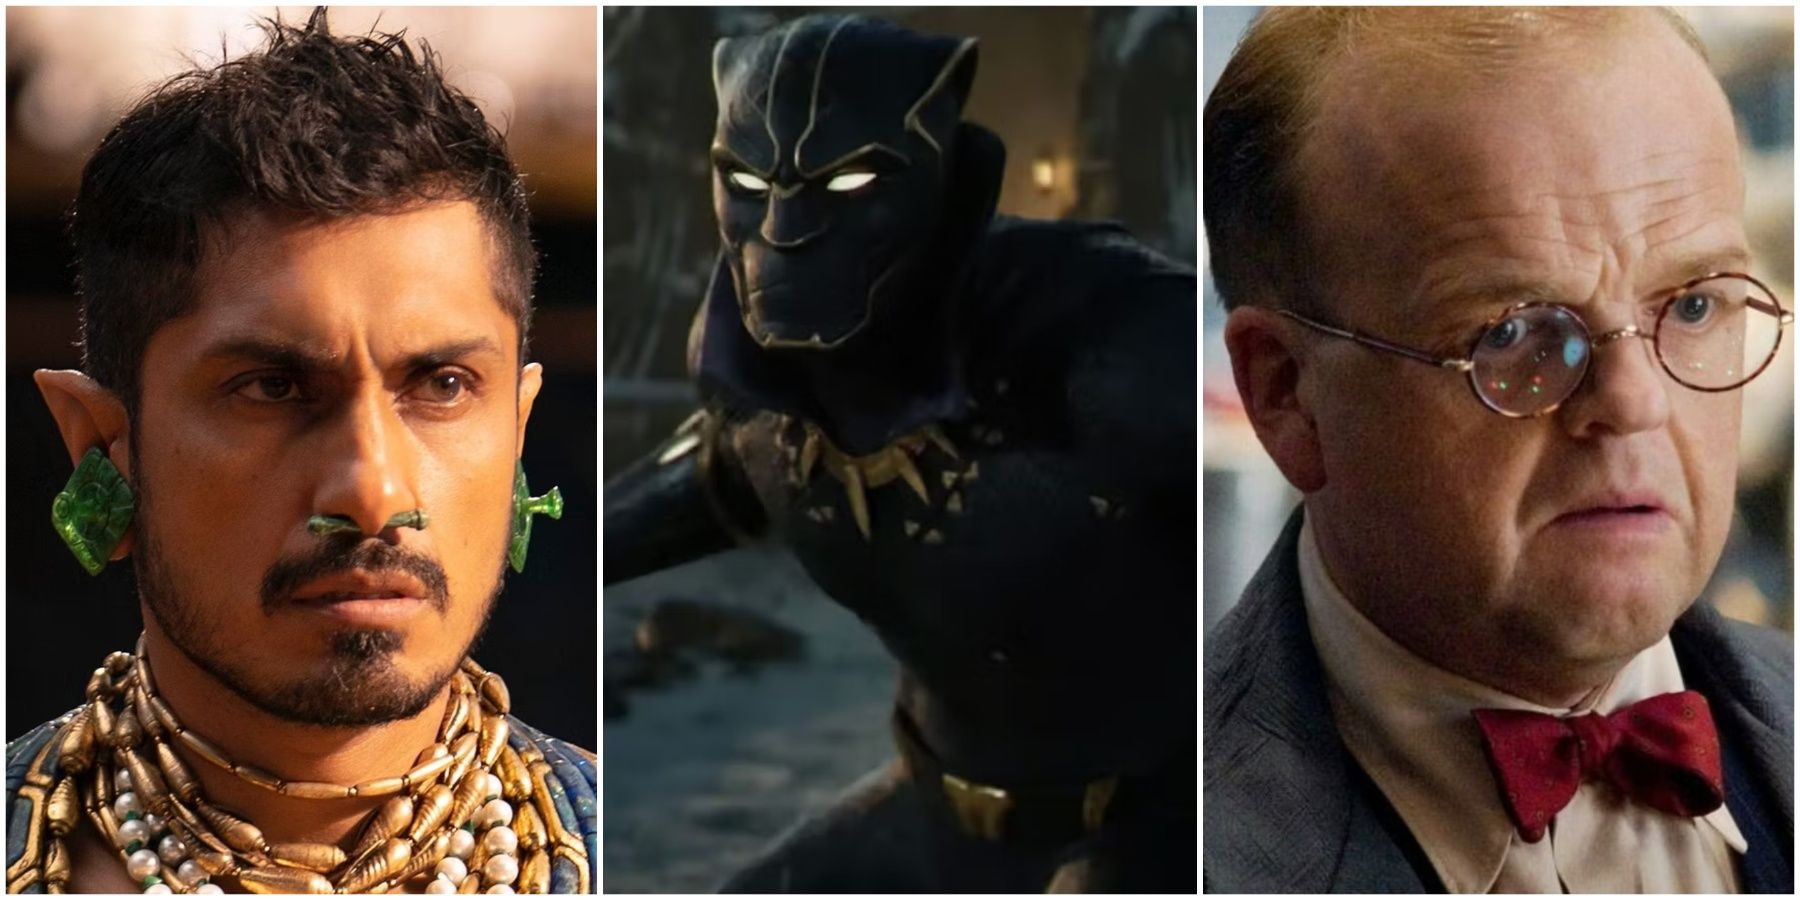 Namor from Black Panther 2, Black Panther from Marvel 1943 Rise of Hydra, and Arnim Zola from Captain America The First Avenger